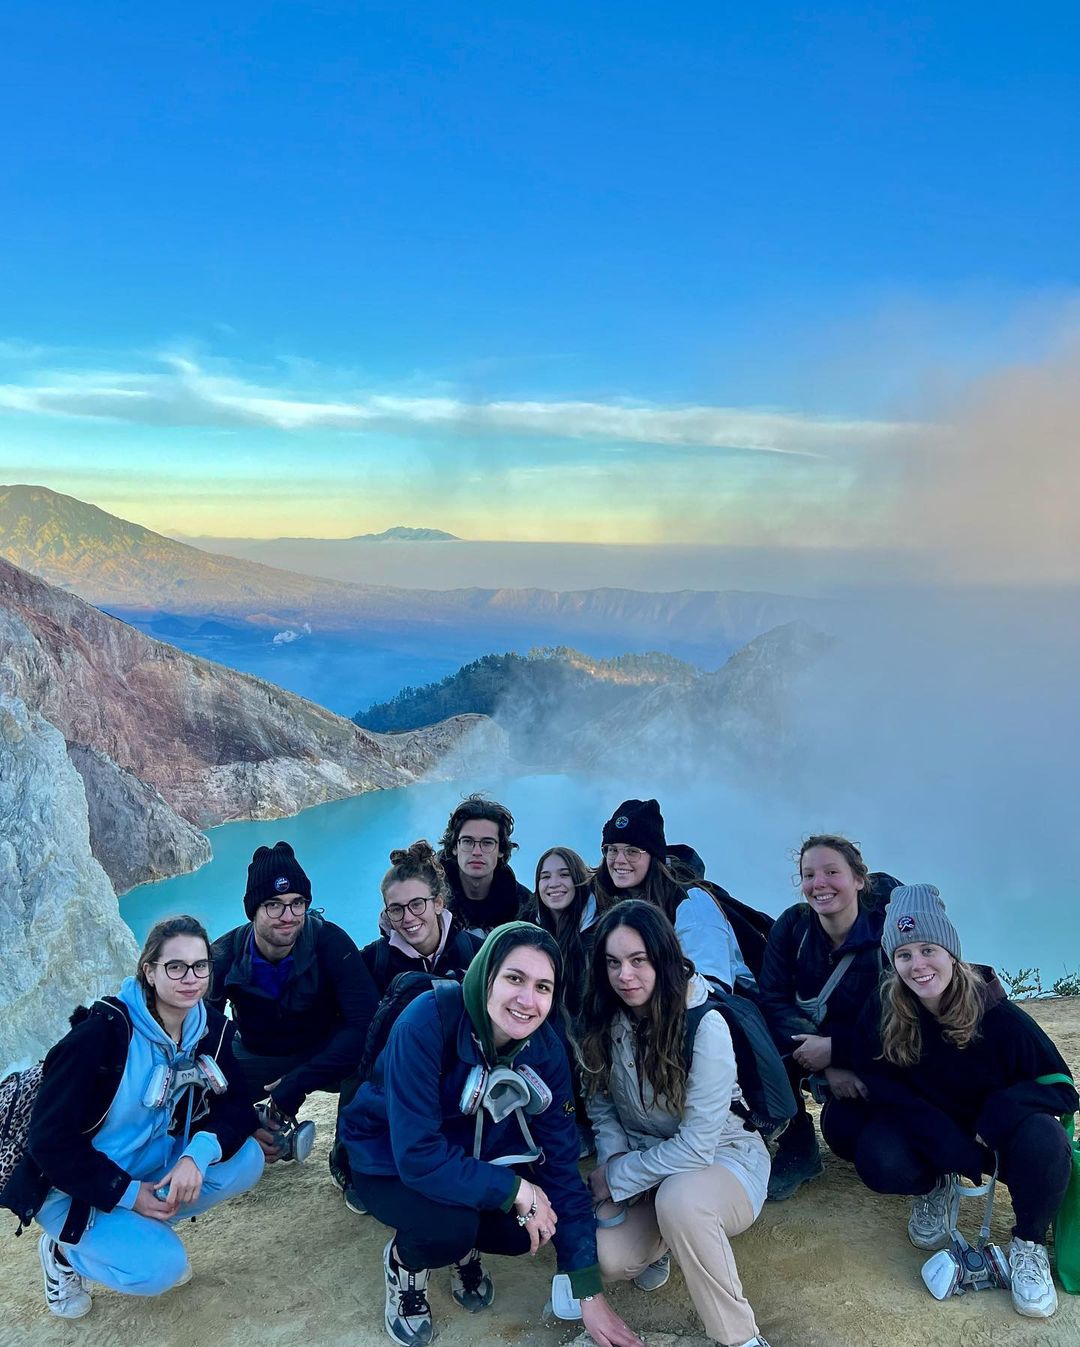 Best price Ijen Crater Tour Shared from Banyuwagi Starting from IDR 350K ALL IN